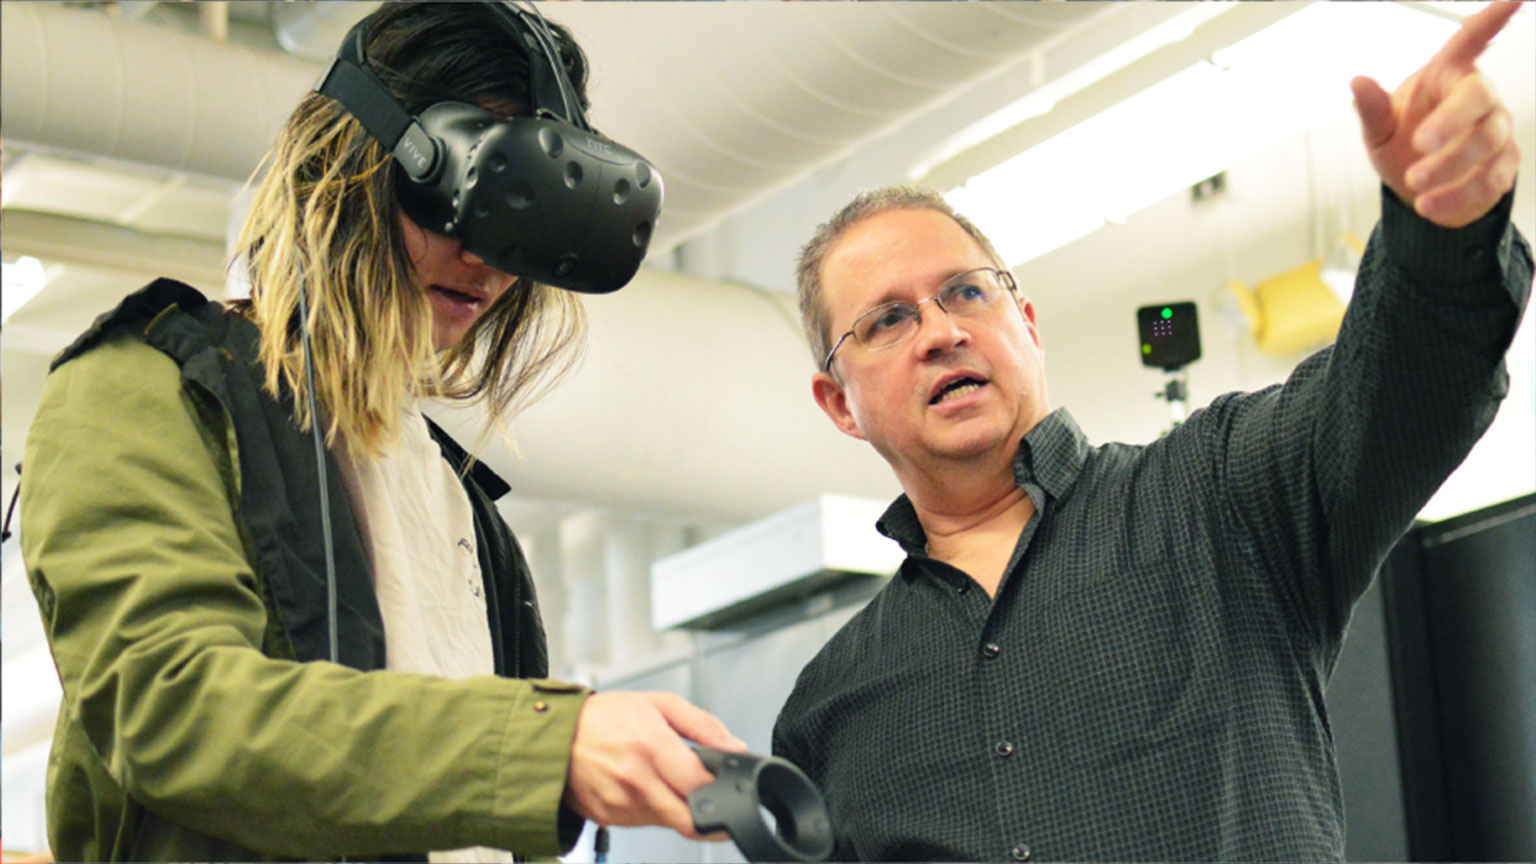 A professor points as a student wears a virtual reality headset.